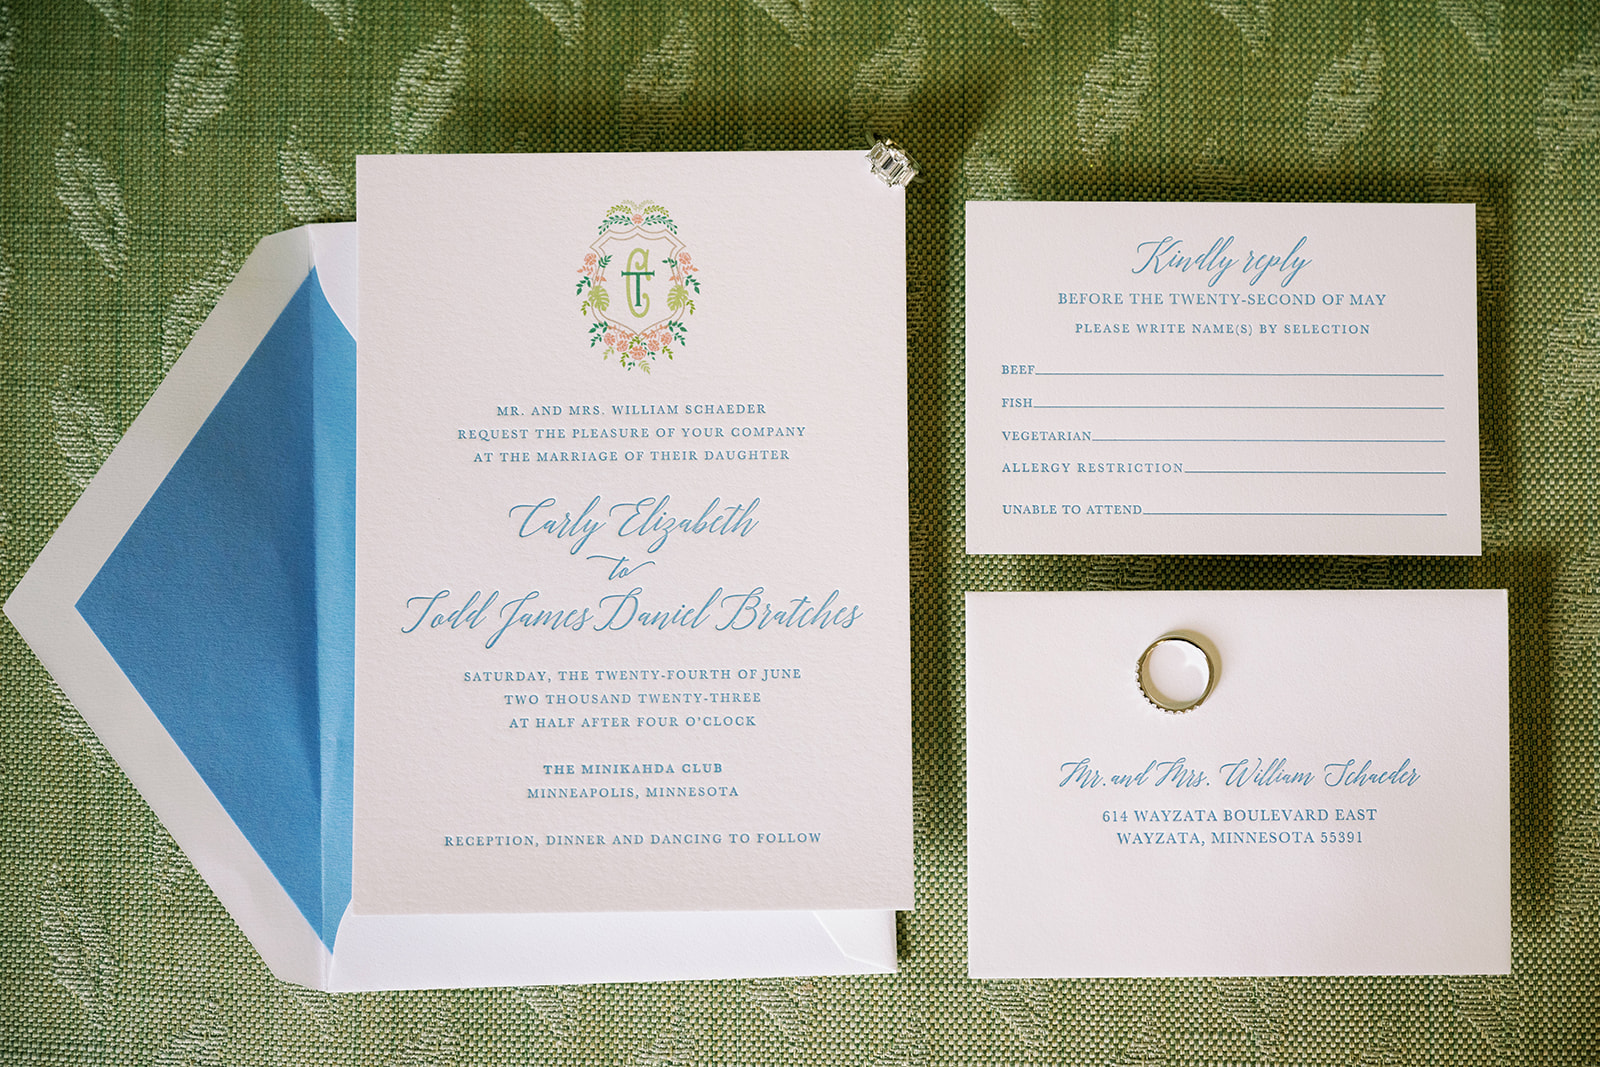 Carly and Todd's invitation suite for their wedding at Minikahda Club in Minneapolis.